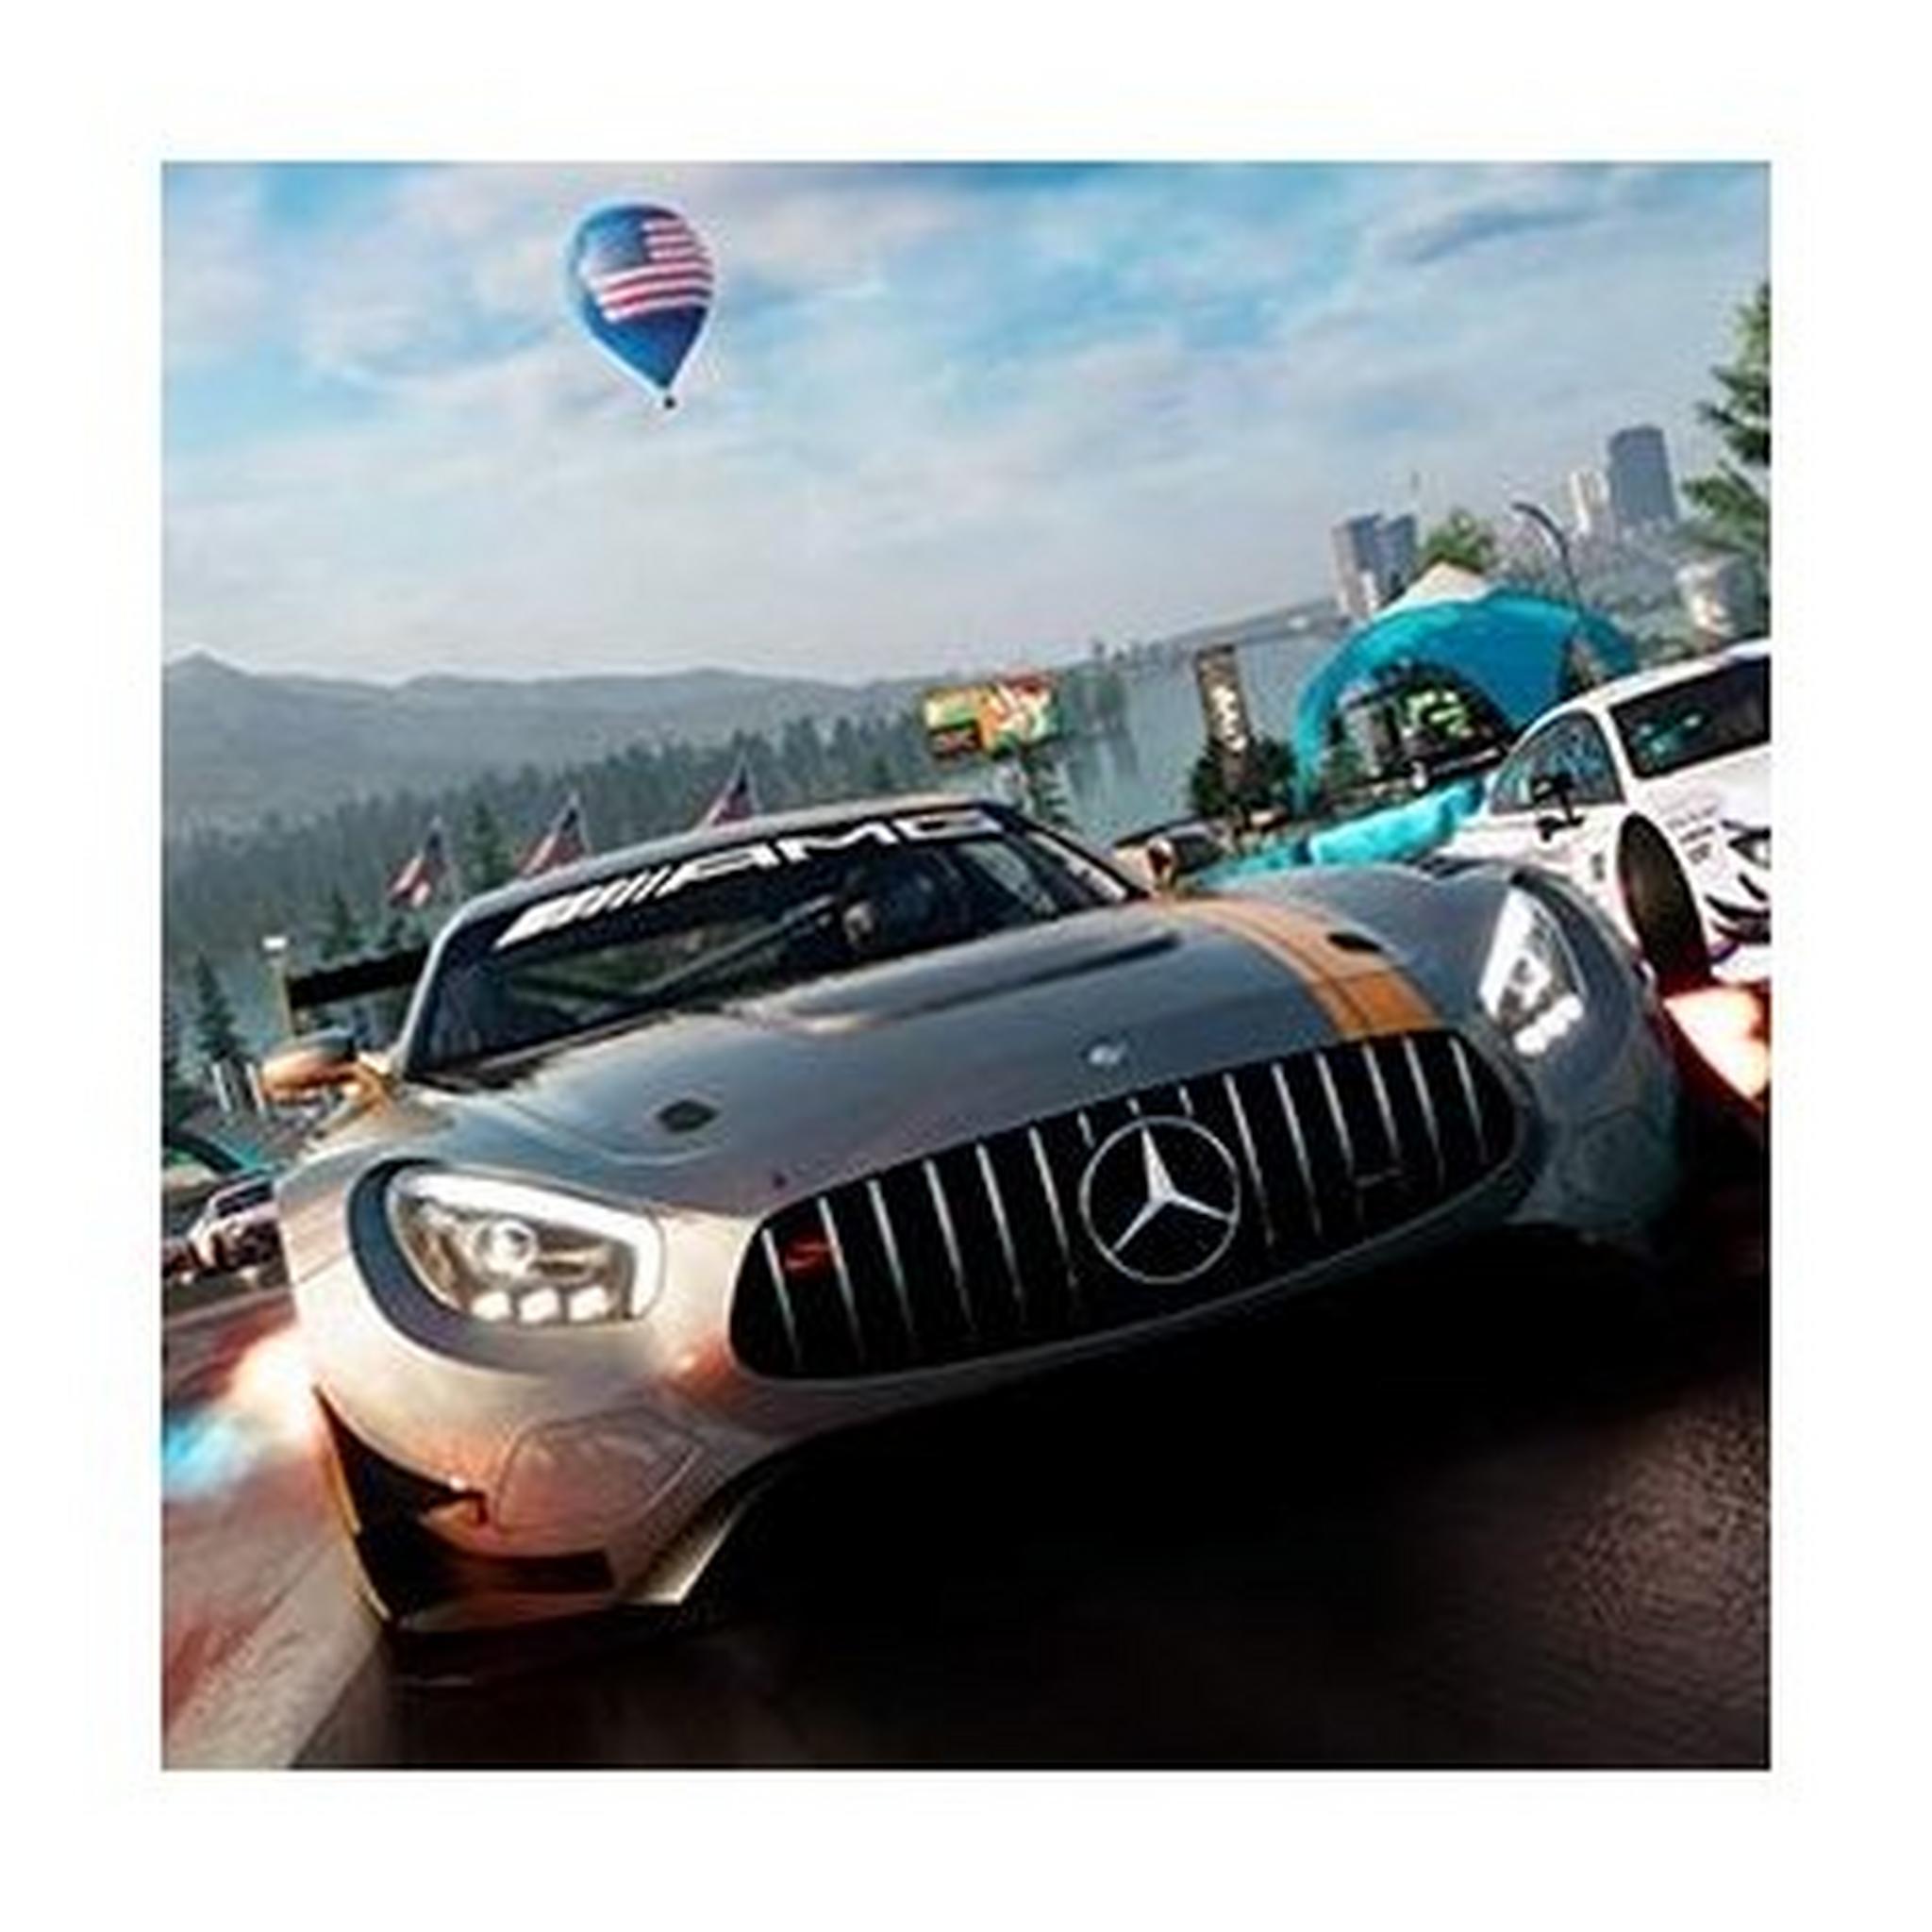 The Crew 2 Deluxe Edition PAL - Xbox One Game